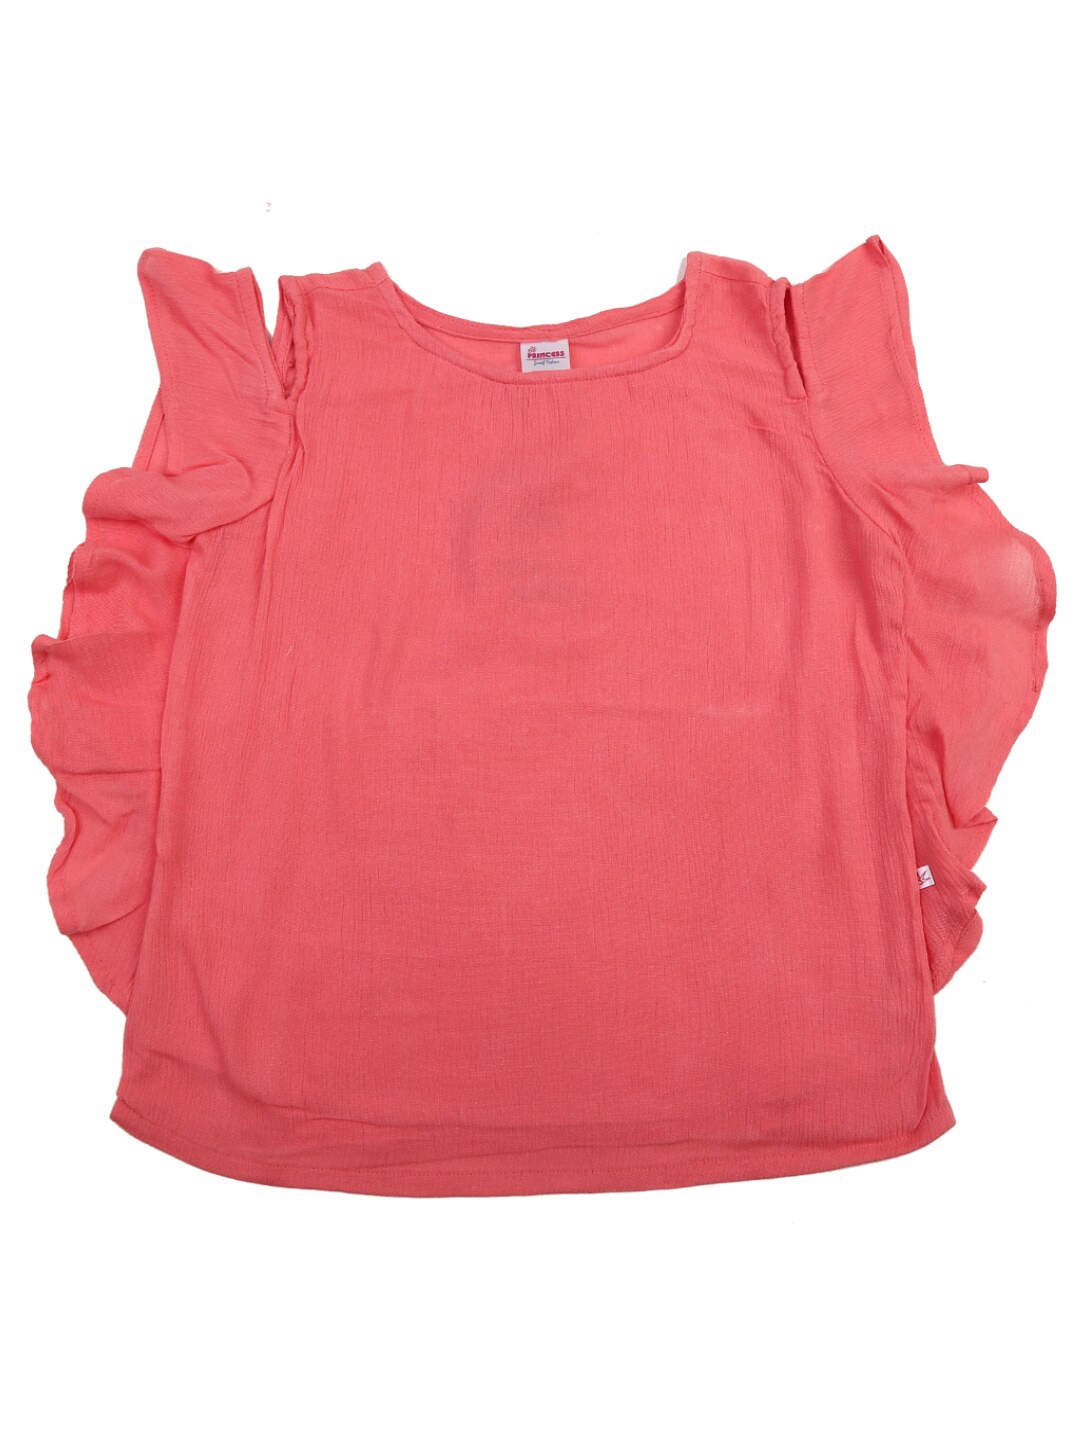 V-Mart Pink Chiffon Cold-shoulder Top Price in India